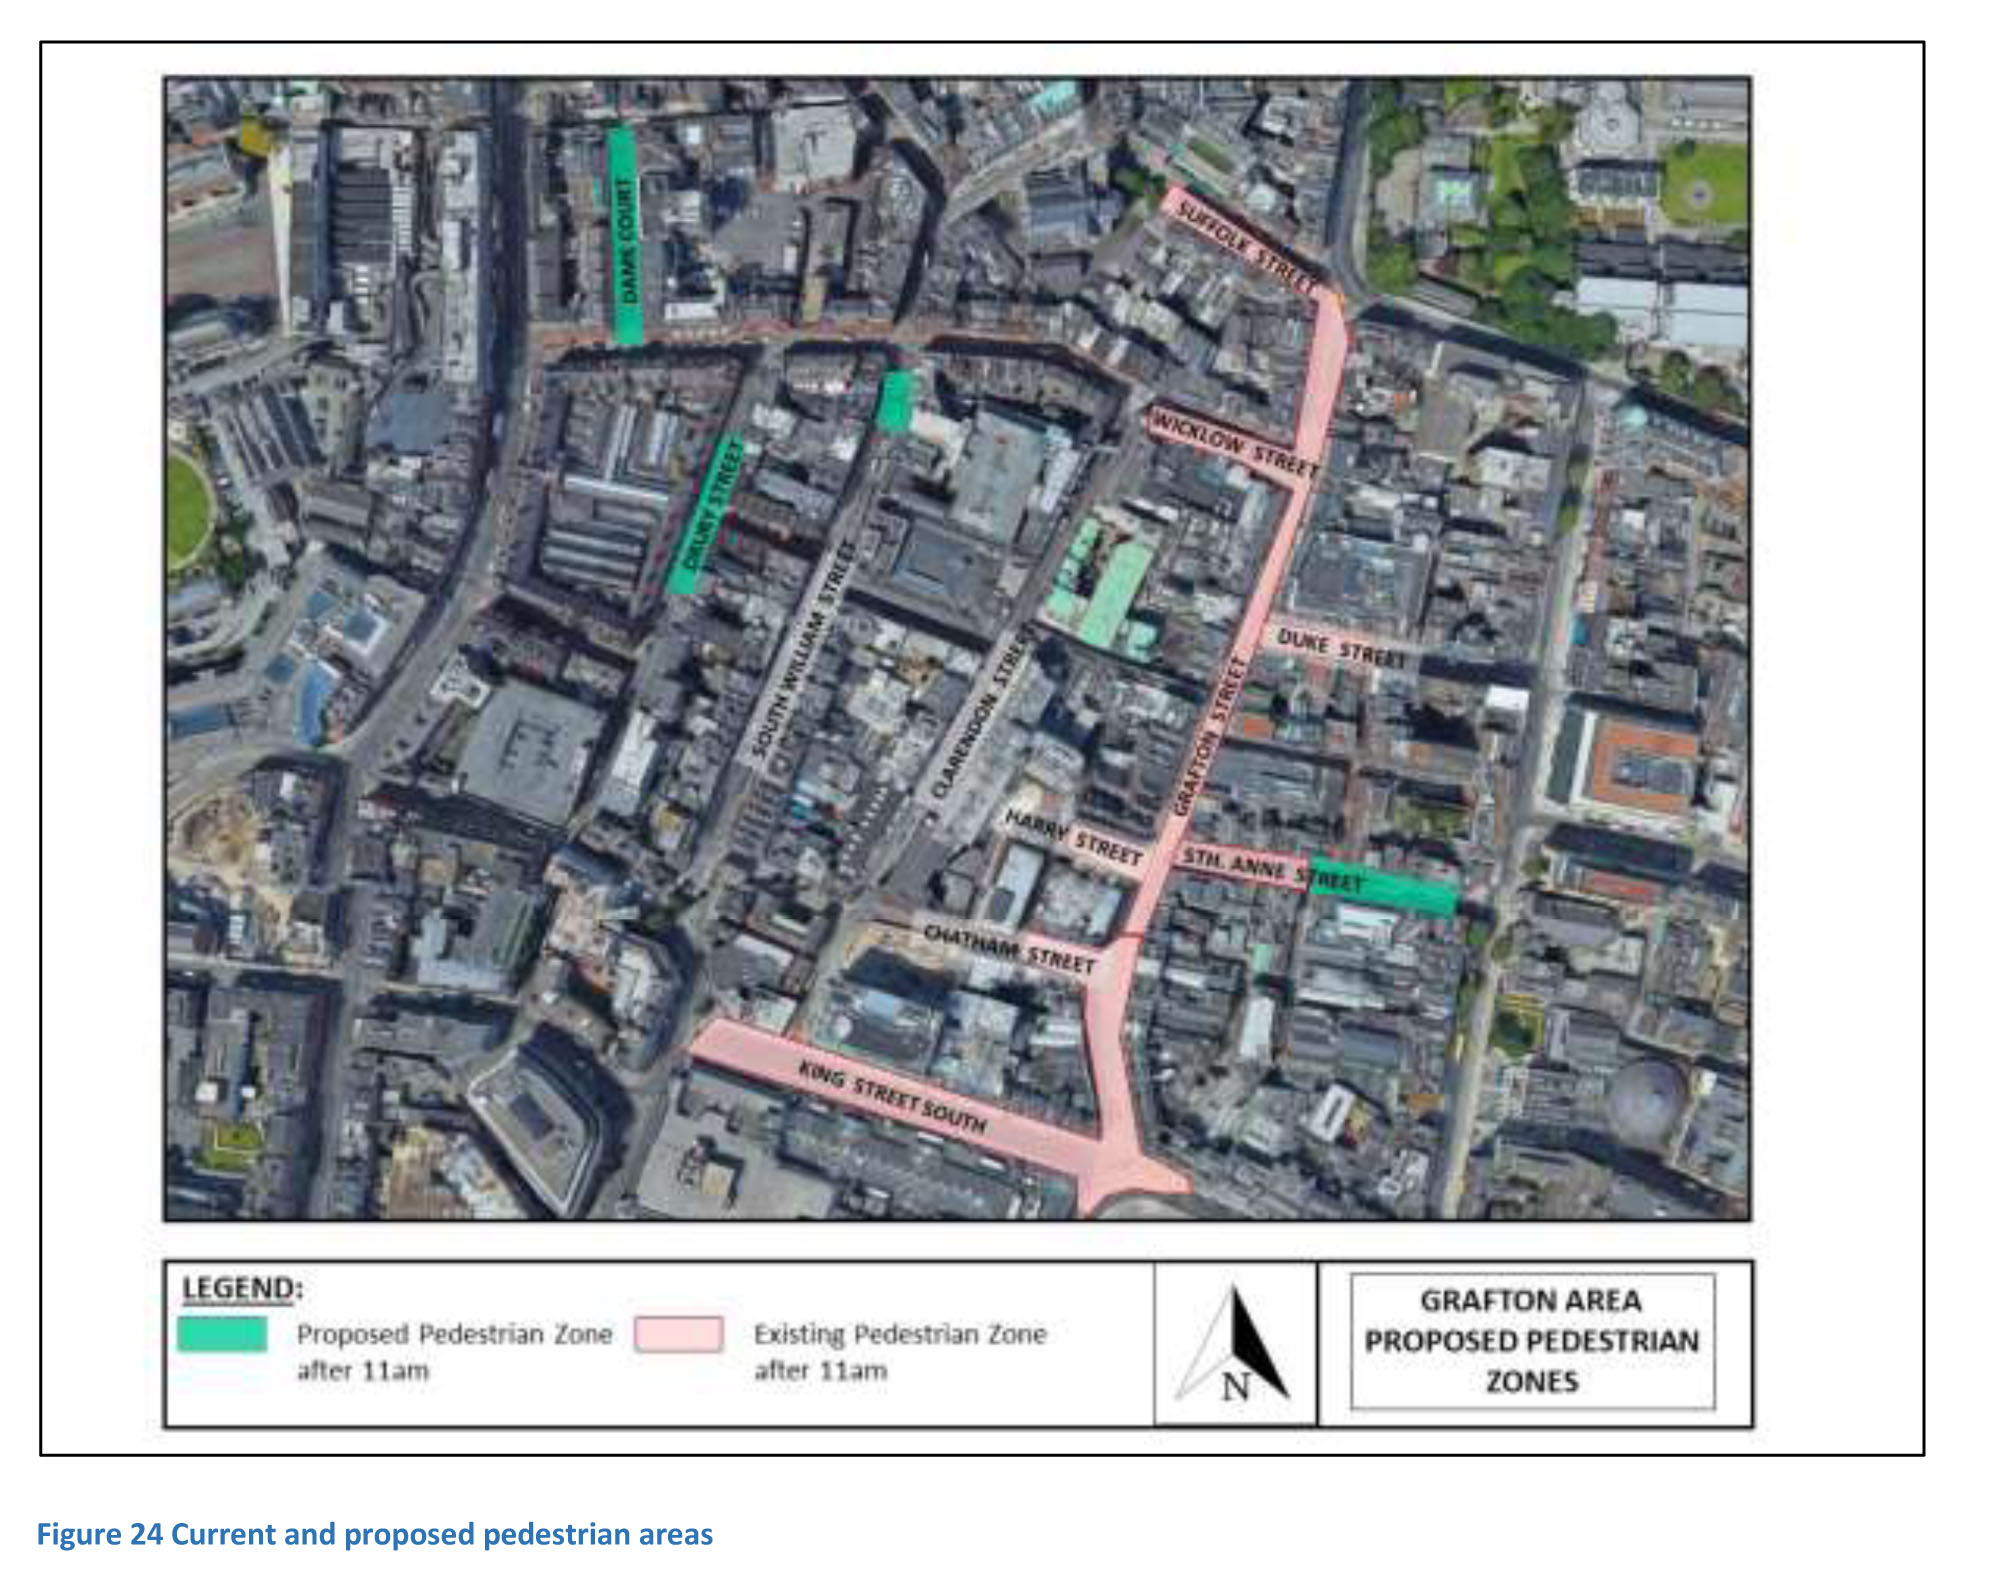 Planned Map Report On Grafton Street Area Trial Pedestrianisation 30102020 2 31 